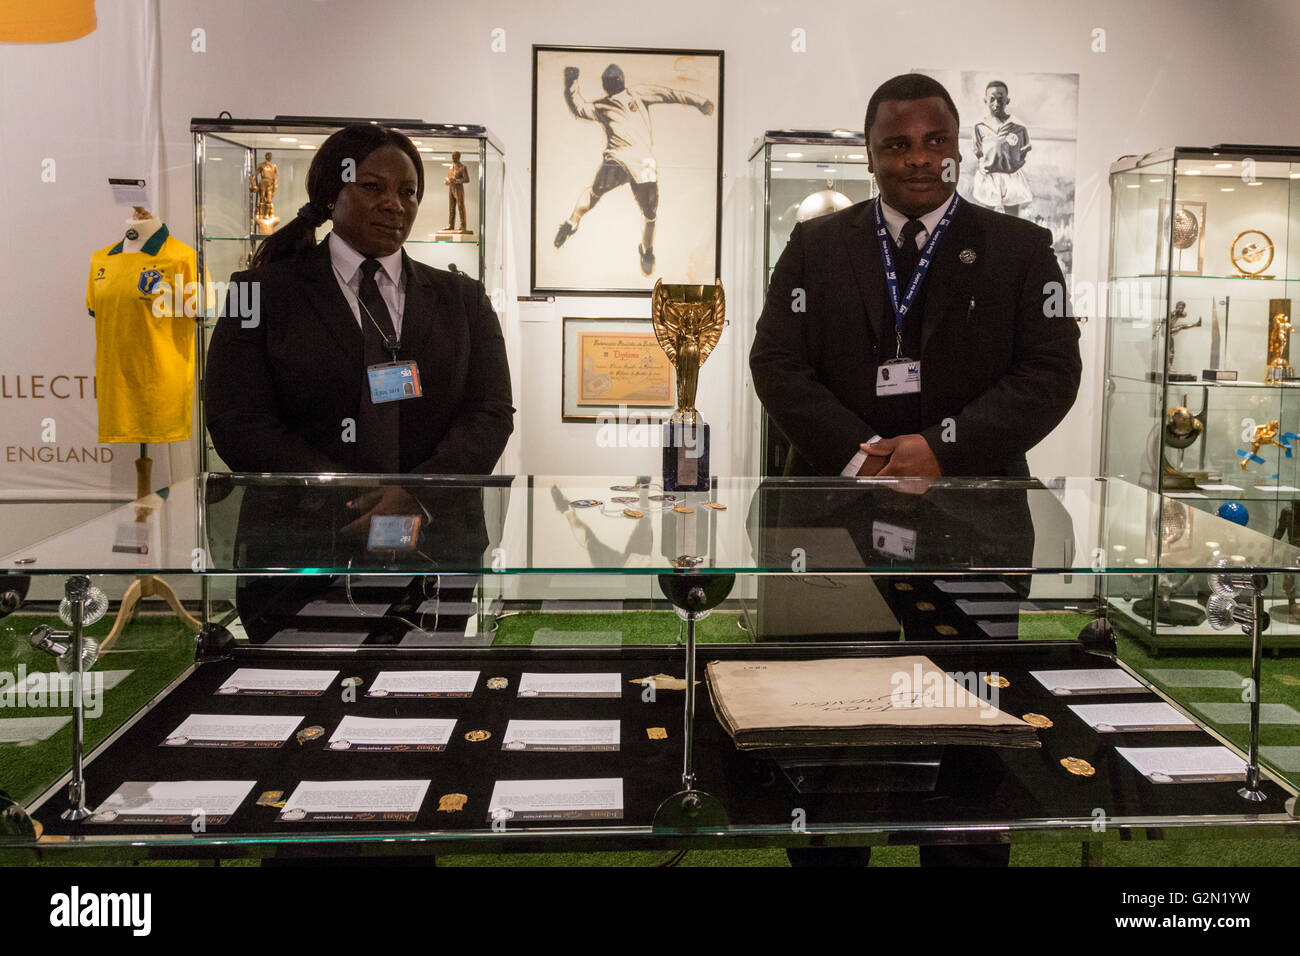 London, UK. 1 June 2016. Security guards with Pele's replica of the Jules Rimet Cup. Press preview of Pele - The Collection, a sale run by Julien's Auctions at Mall Galleries. Highlights include Pele's Jules Rimet Trophy; 1958, 1962 and 1970 World Cup Medals; Santos FC game worn jerseys and boots; awards received while playing with Santos FC; his 1977 New York Cosmos NASL championship ring; FIFA Player of the Century Award; L'Equipe Athlete of the Century Award; 2007 FIFA President's Award and the torch used by Pele when he ran in the 2004 Summer Olympics Torch Relay. Stock Photo